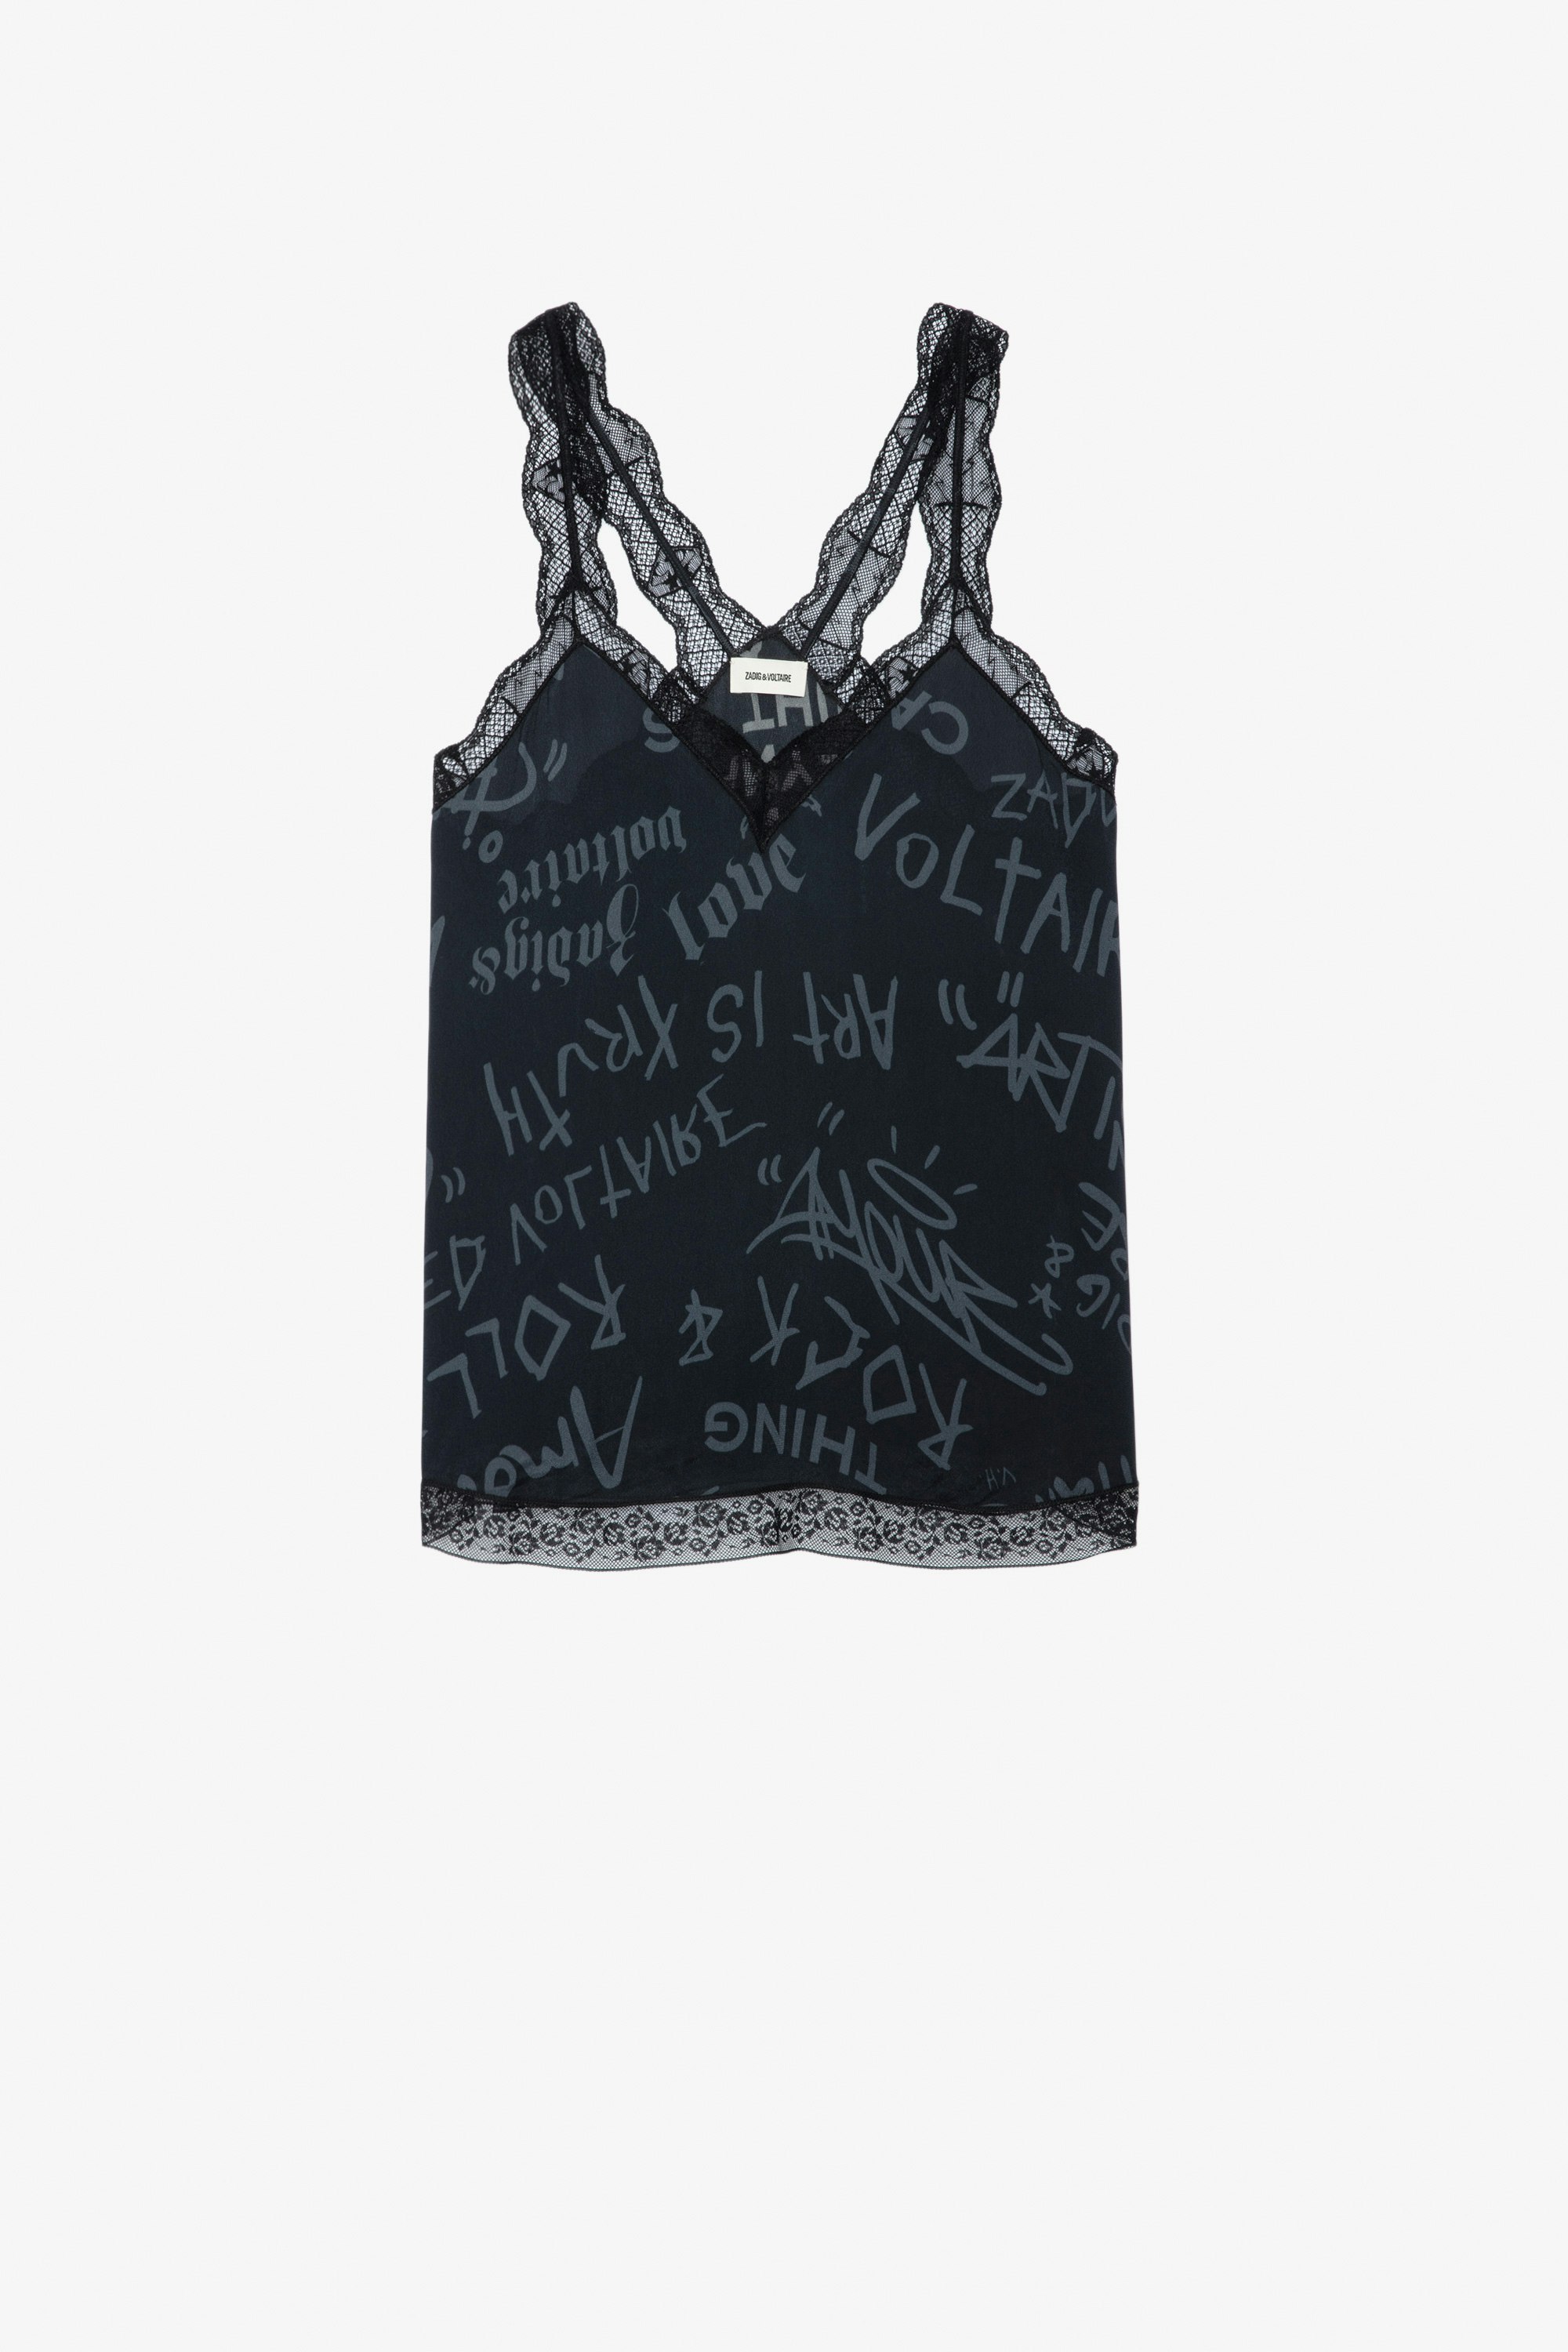 Chou Crepe Camisole - Women's crepe camisole with all over graffiti motifs.